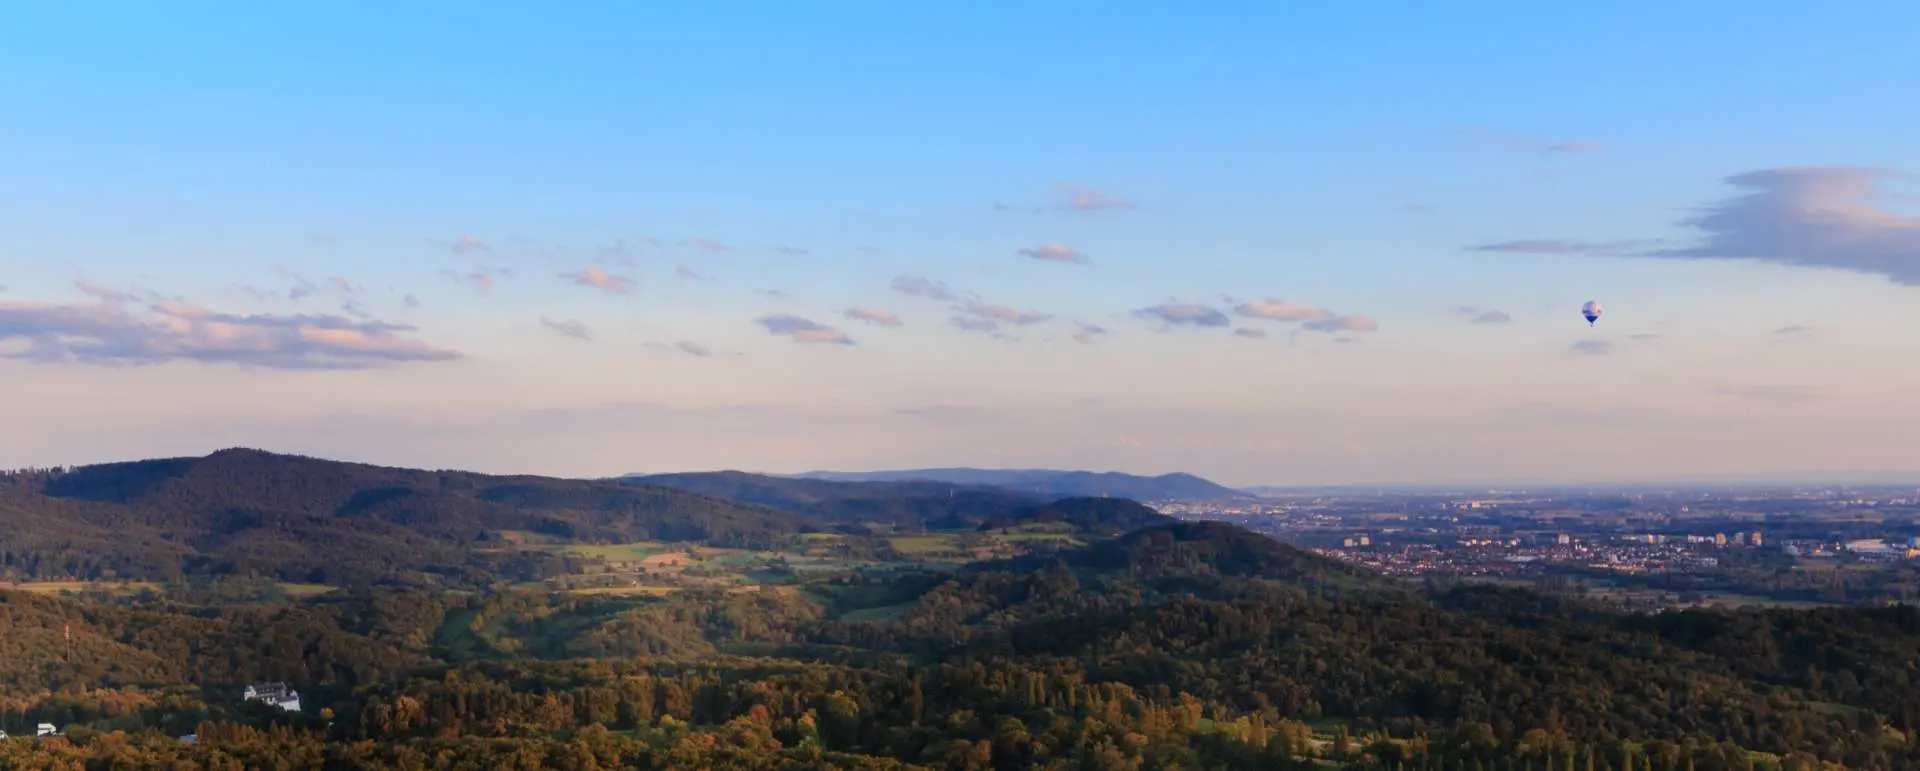 Constituency of Odenwald - the destination for groups